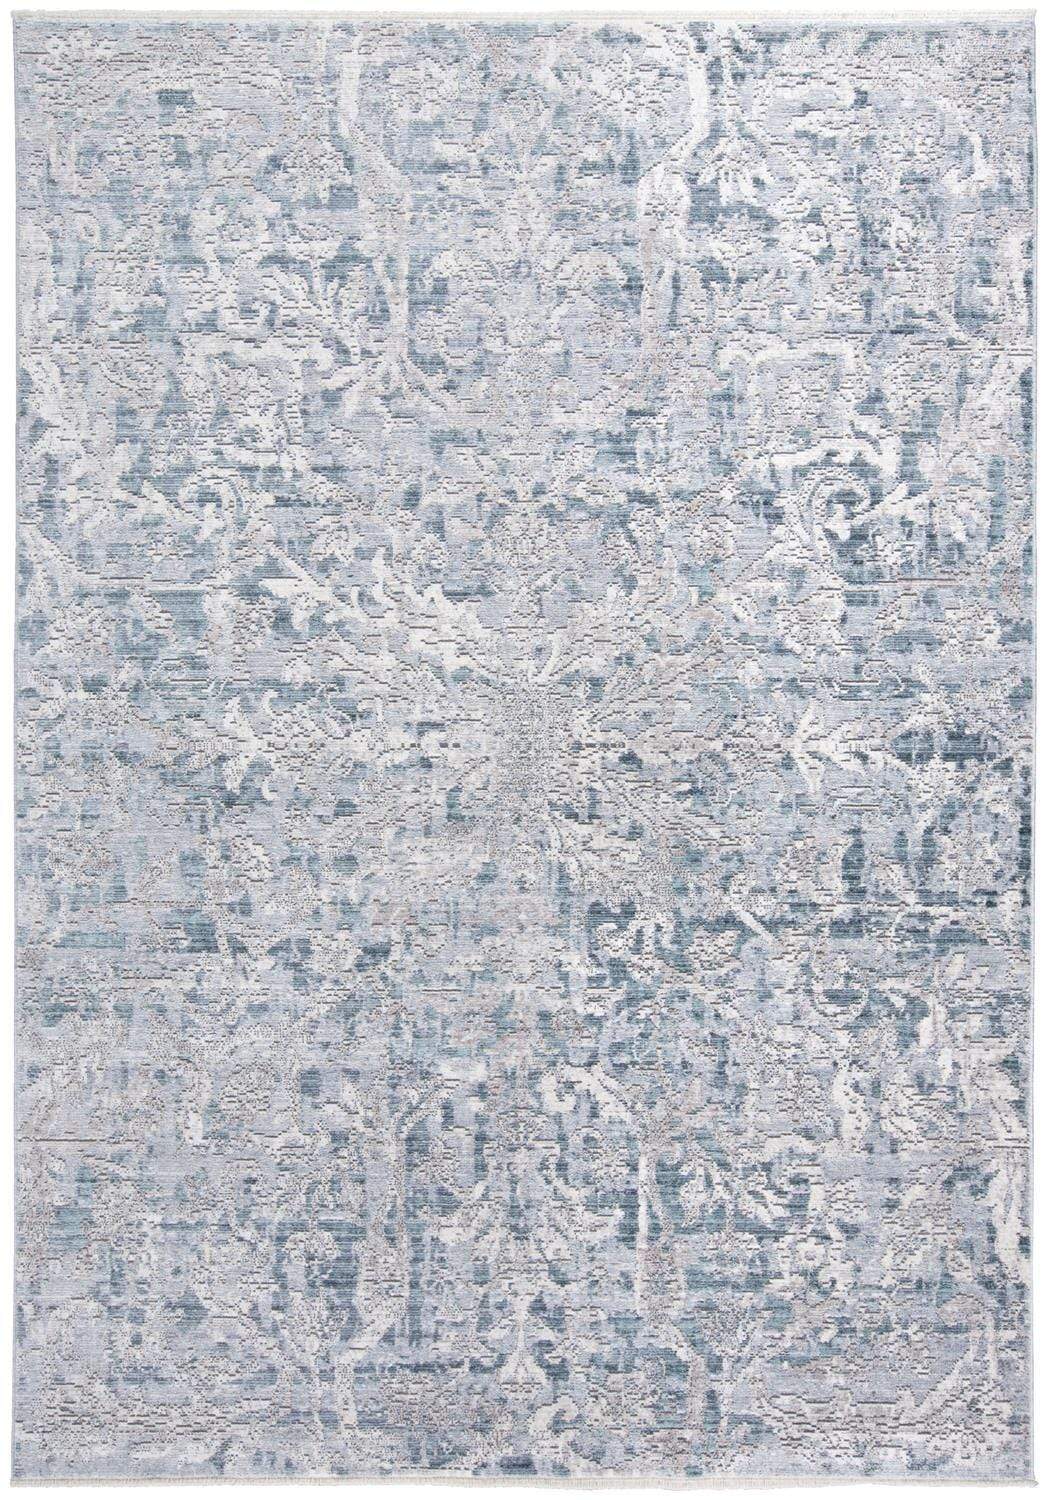 Feizy Feizy Cecily Luxury Distressed Ornamental Rug - Gray & Teal Blue - Available in 7 Sizes 3' x 5' 8573574FATL000B00